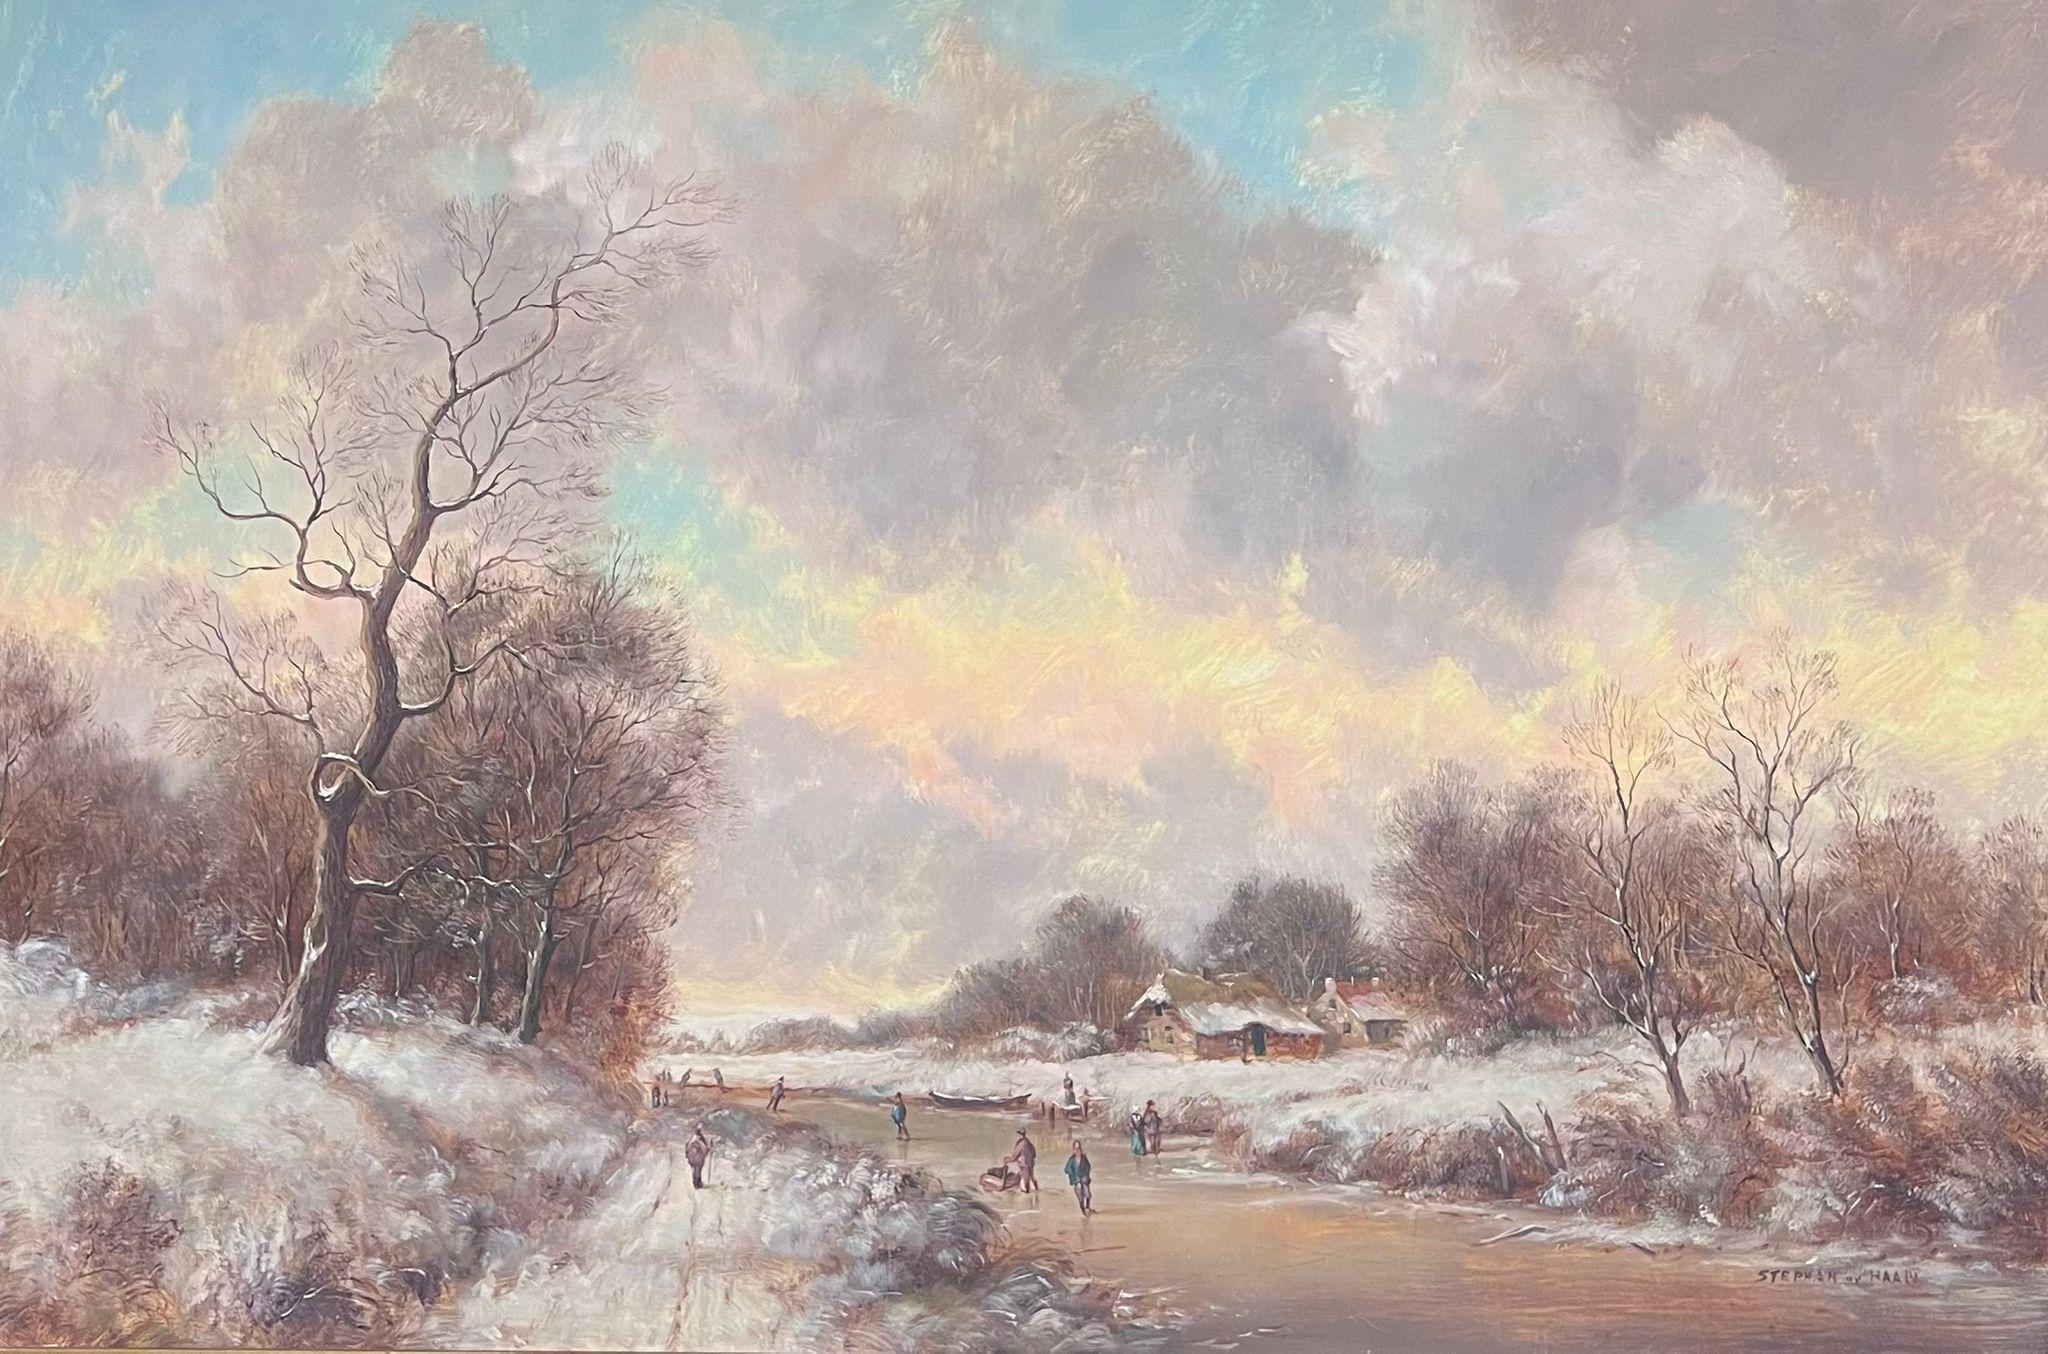 Classical Dutch Winter Scene
signed, 20th century
oil on canvas, framed
canvas: 22.5 x 30 inches
framed: 24 x 36 inches
provenance: private collection, UK
condition: overall very good and sound condition; due to the fragility of frames we cannot